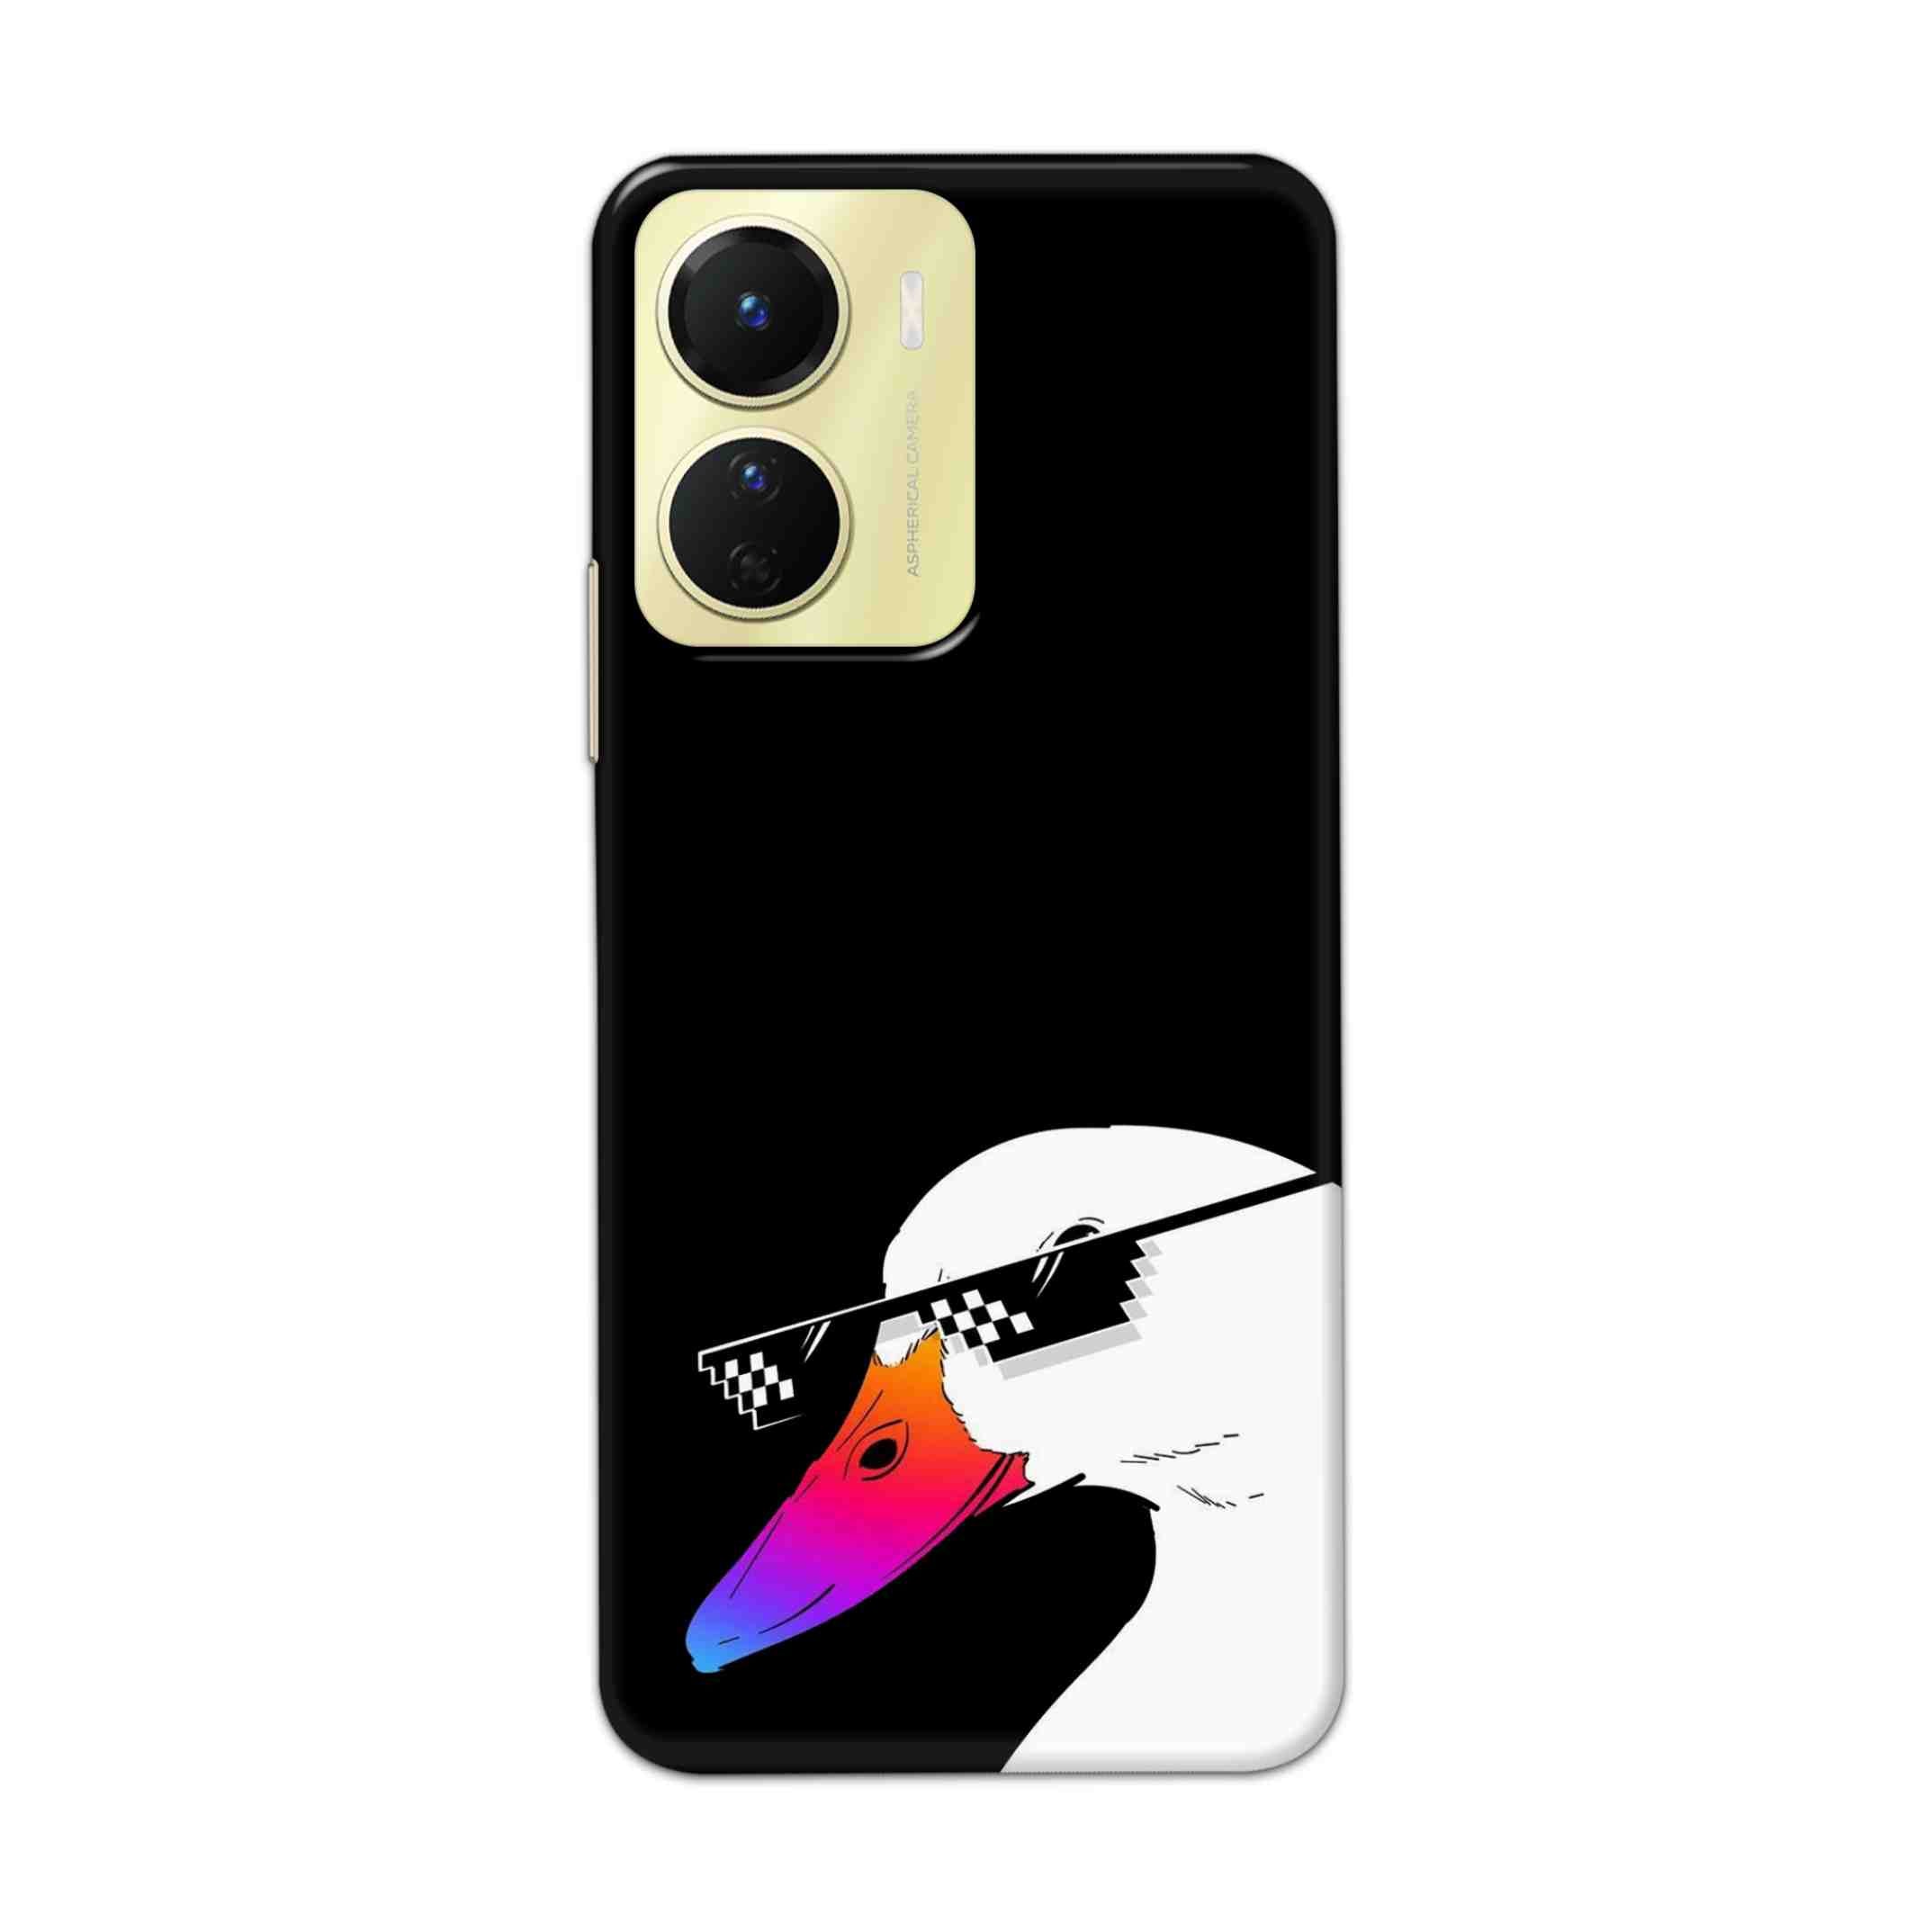 Buy Neon Duck Hard Back Mobile Phone Case Cover For Vivo Y16 Online